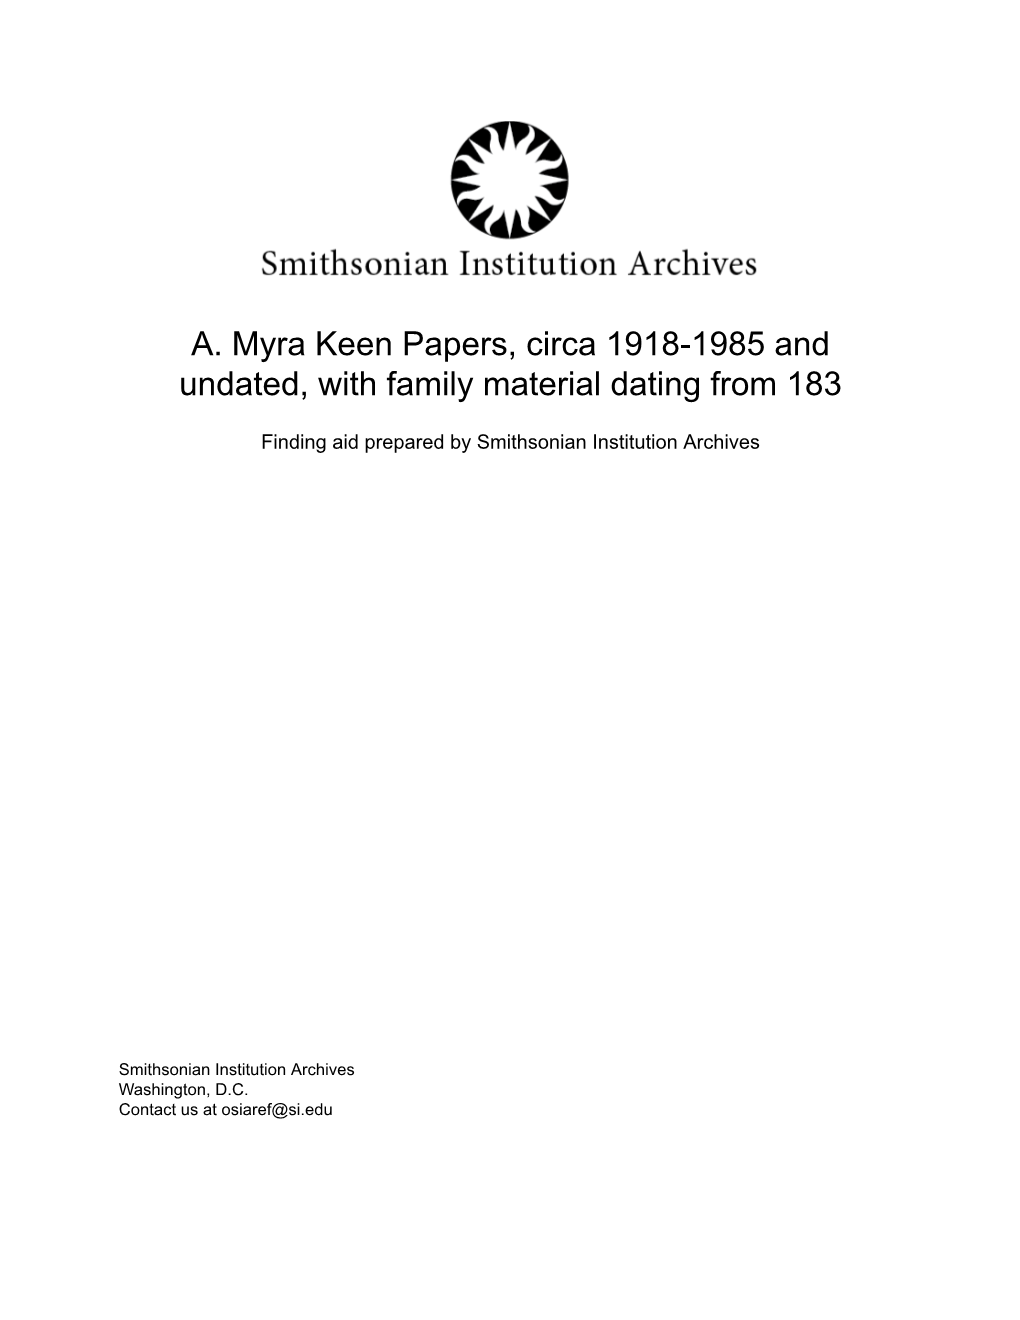 A. Myra Keen Papers, Circa 1918-1985 and Undated, with Family Material Dating from 183